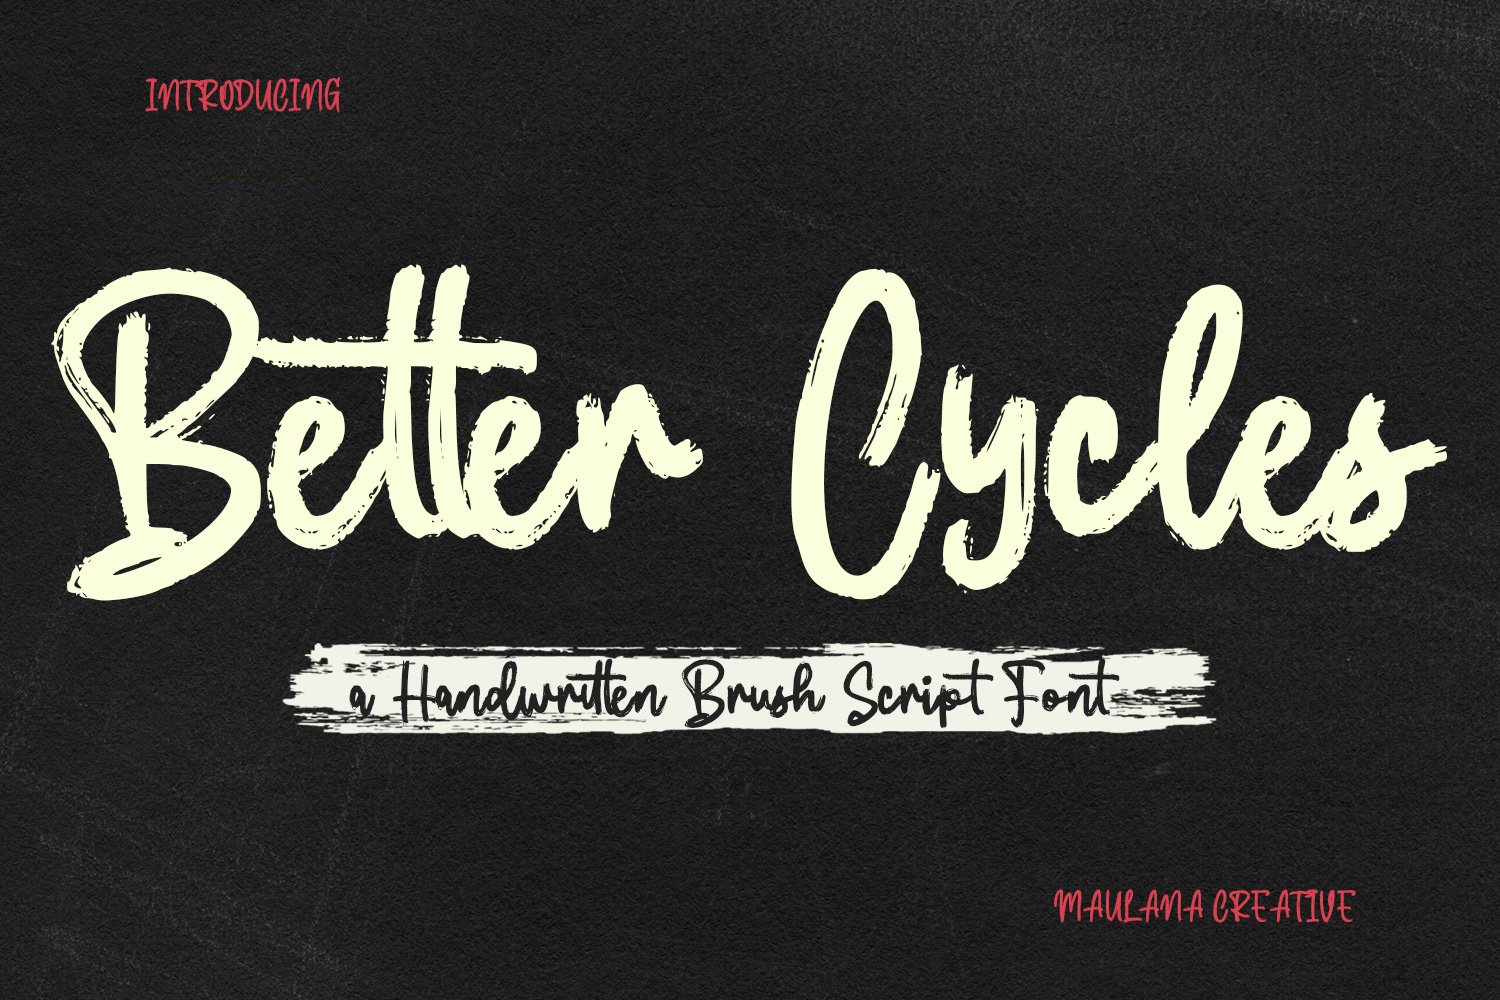 Better Cycles Handwritten Brush Font cover image.